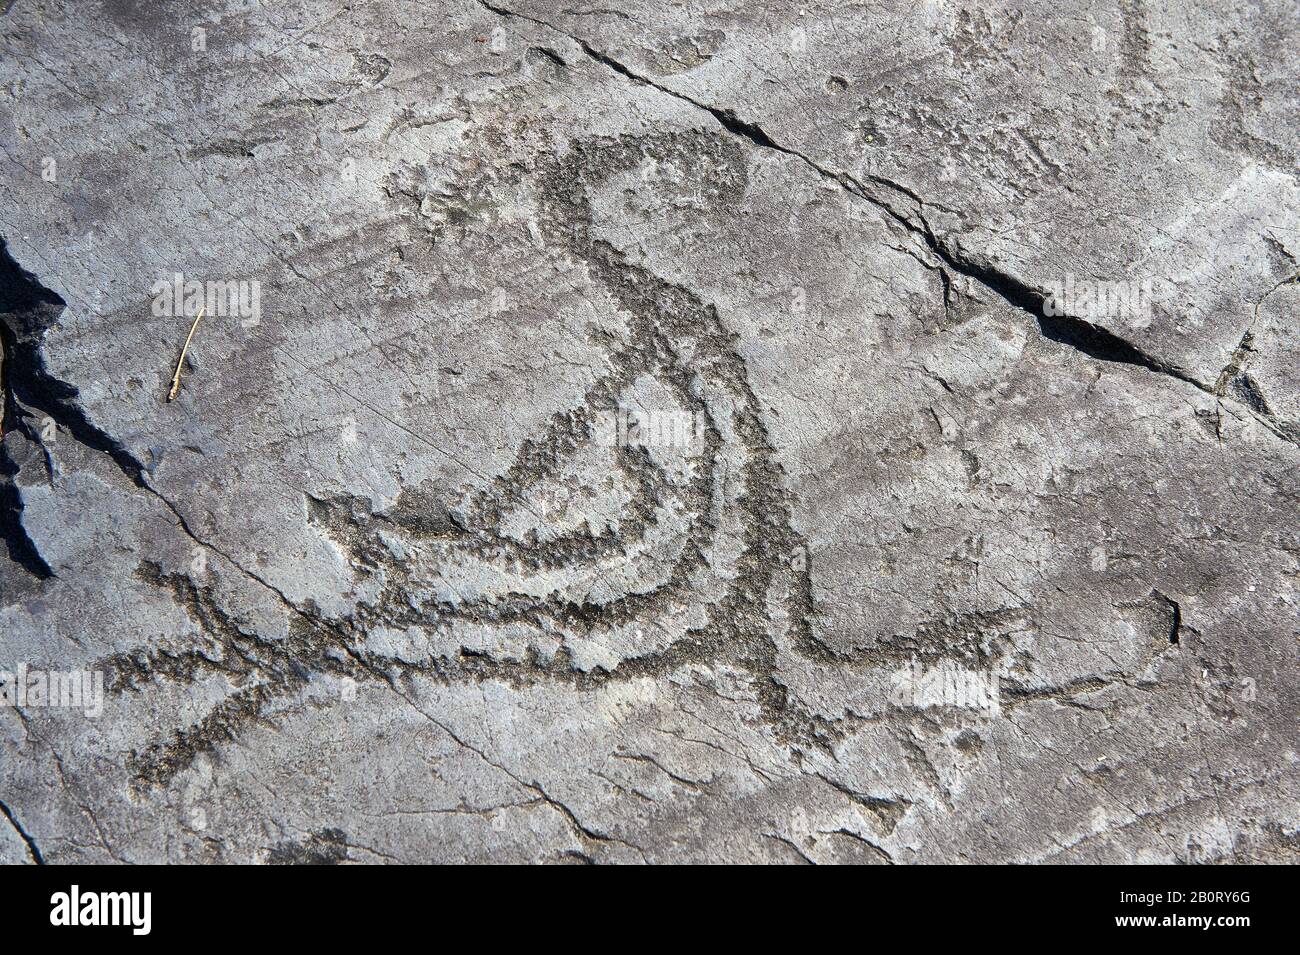 Petroglyph, rock carving, of a bird by the ancient Camunni people in the iron age between 1000-1200 BC, Rock no 6, Foppi di Nadro, Riserva Naturale In Stock Photo